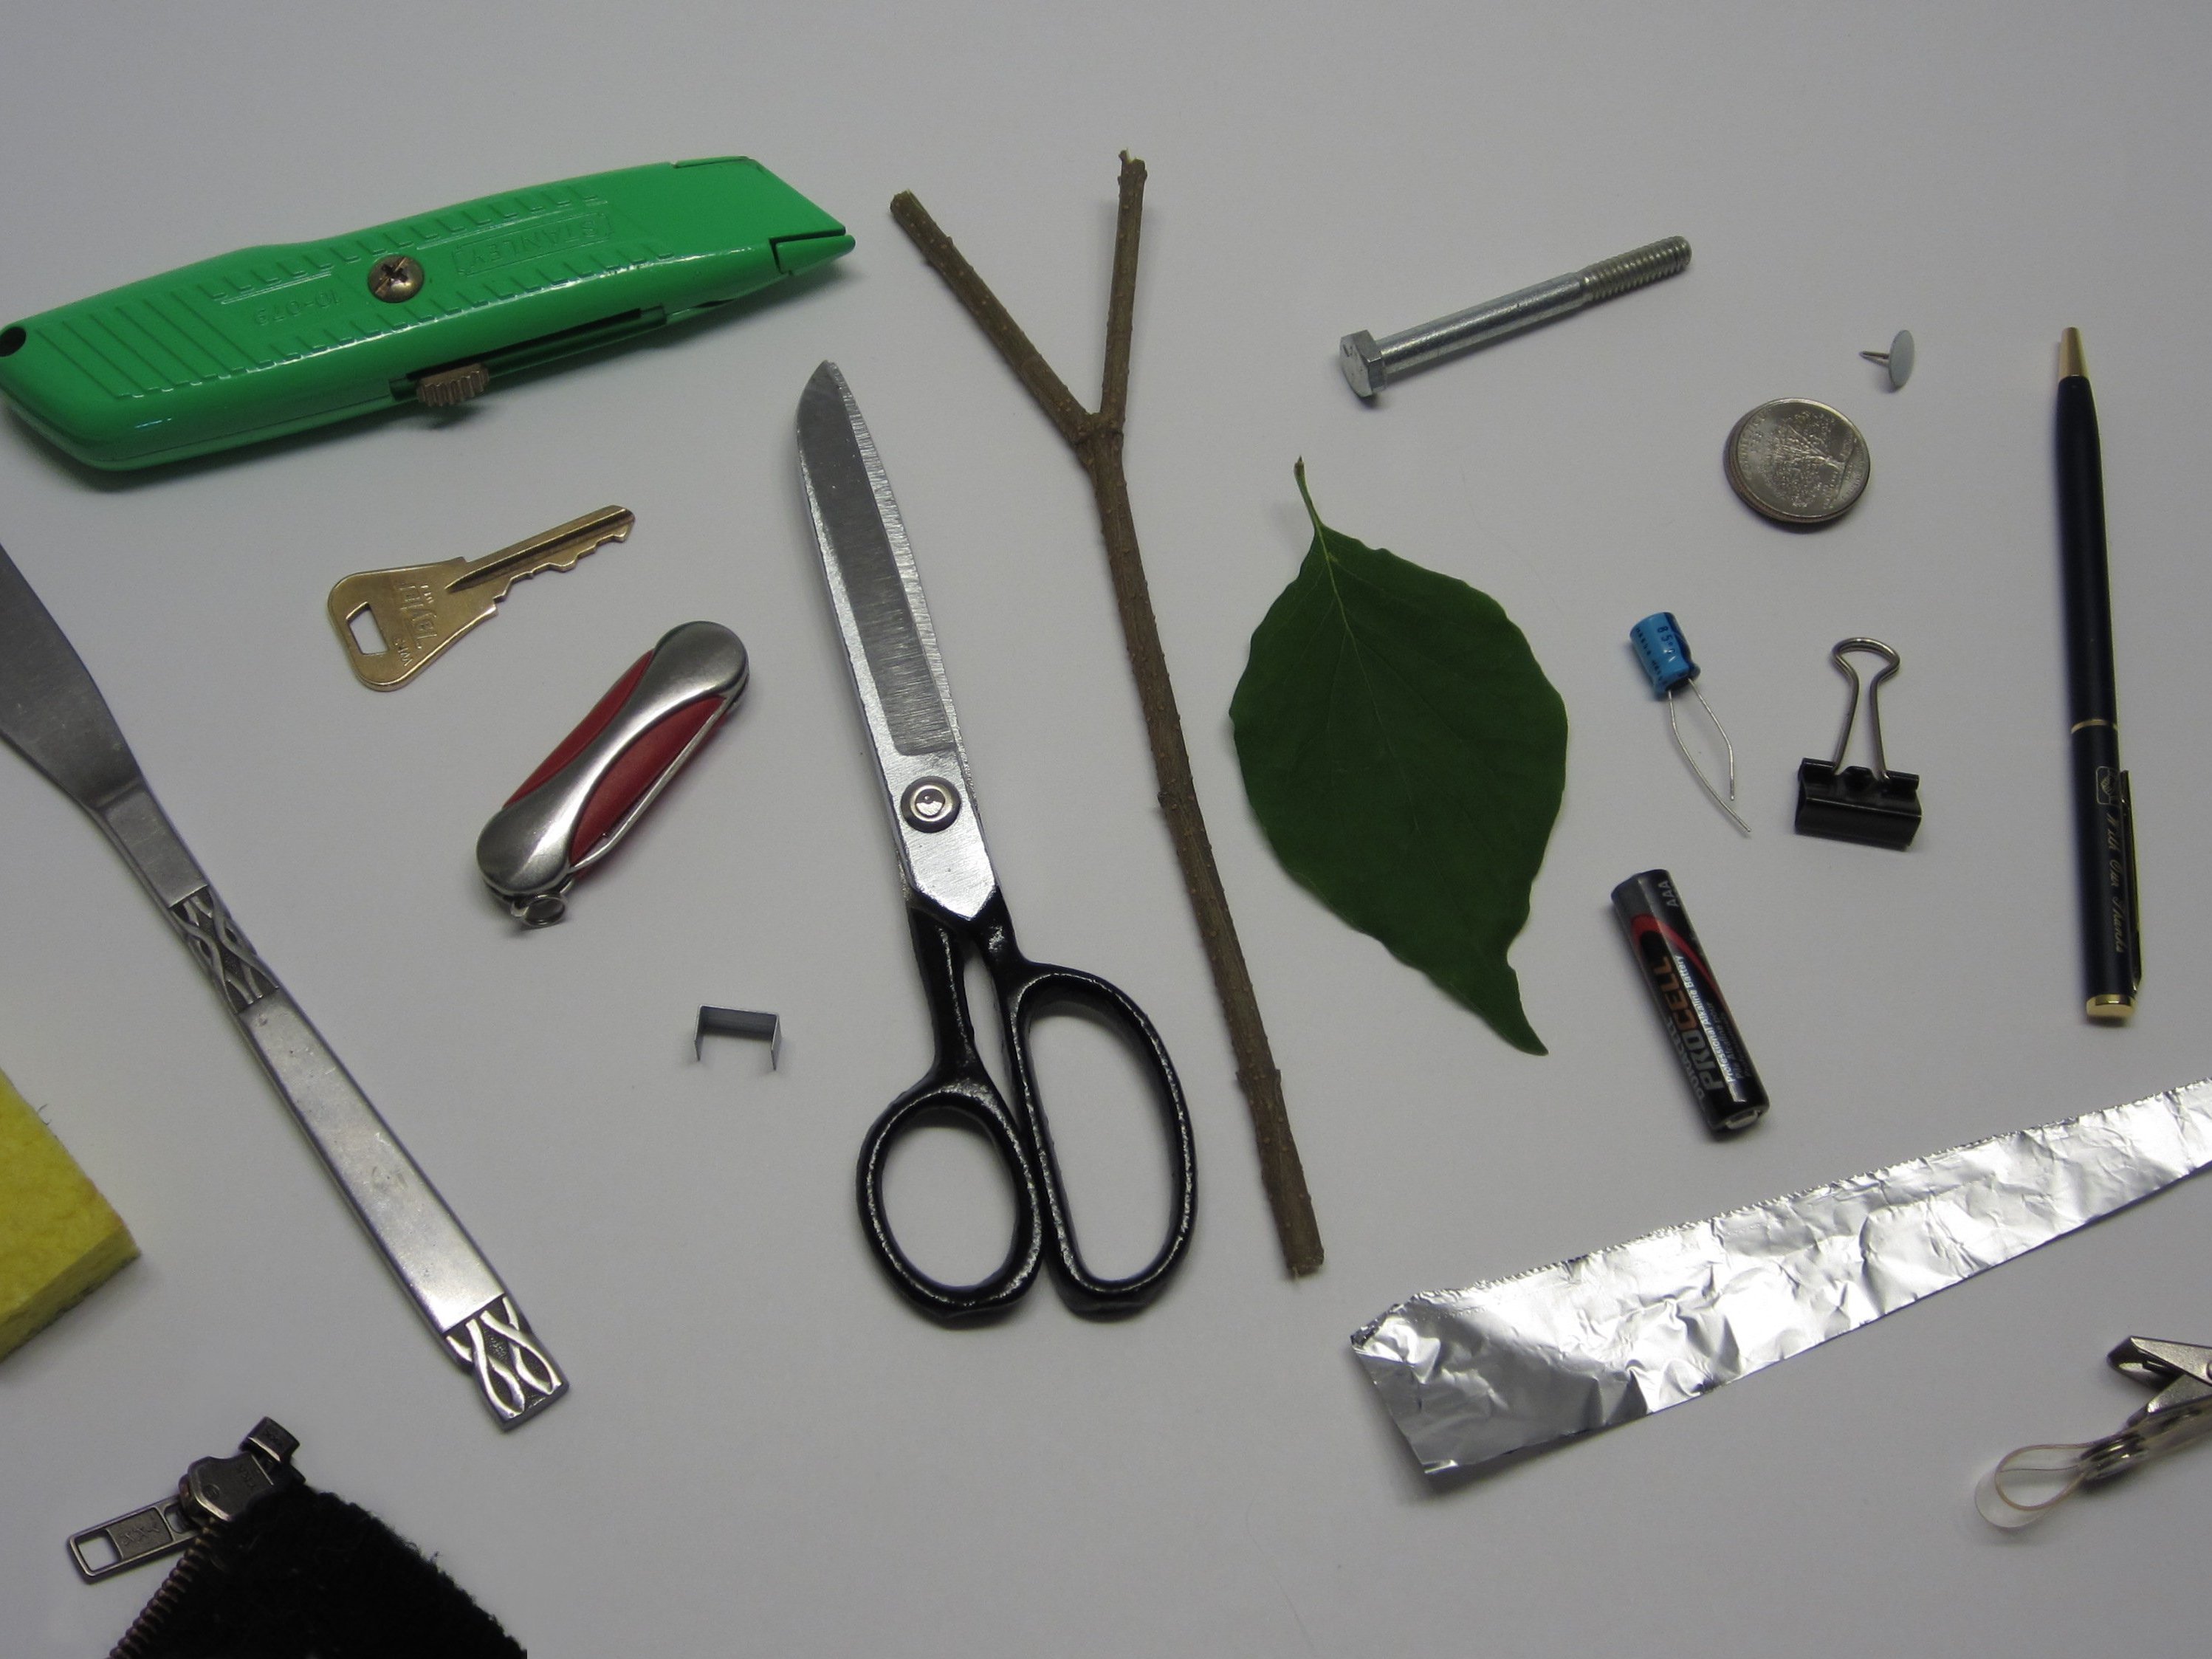 Mediaan veelbelovend Puur Make a Capacitive Stylus out of Everyday Objects | Make: